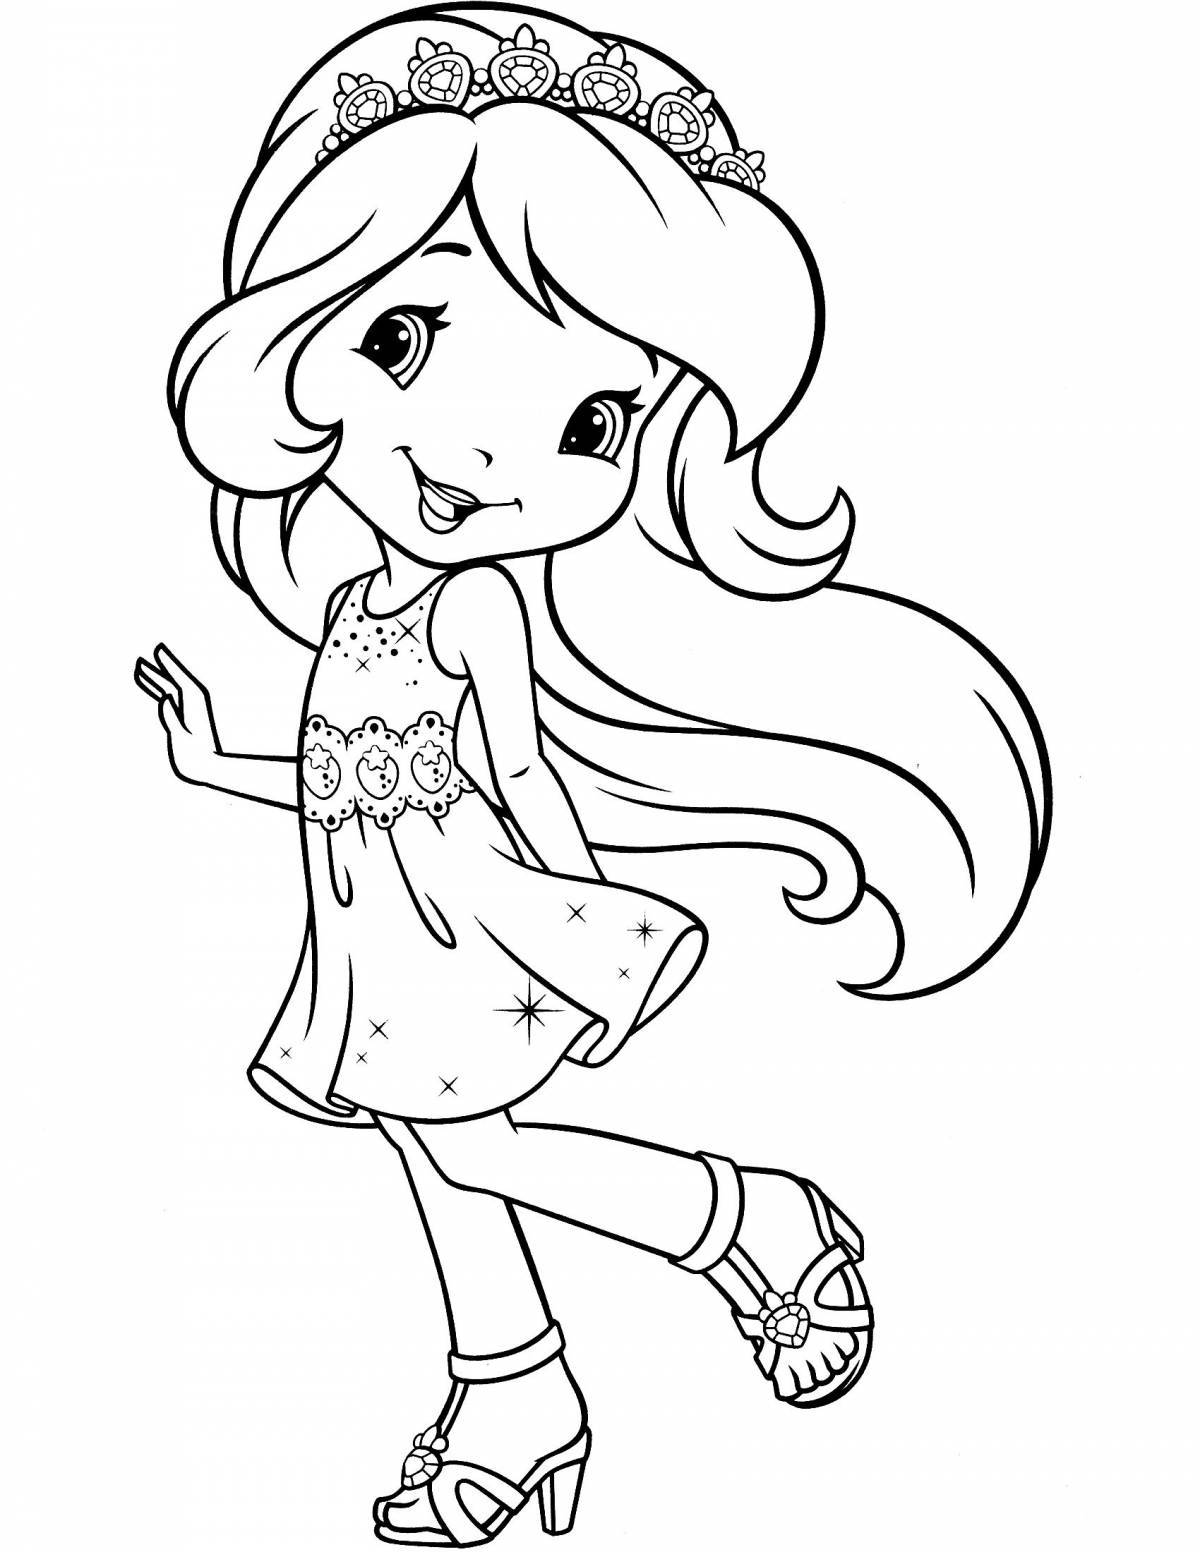 Delightful girly coloring book